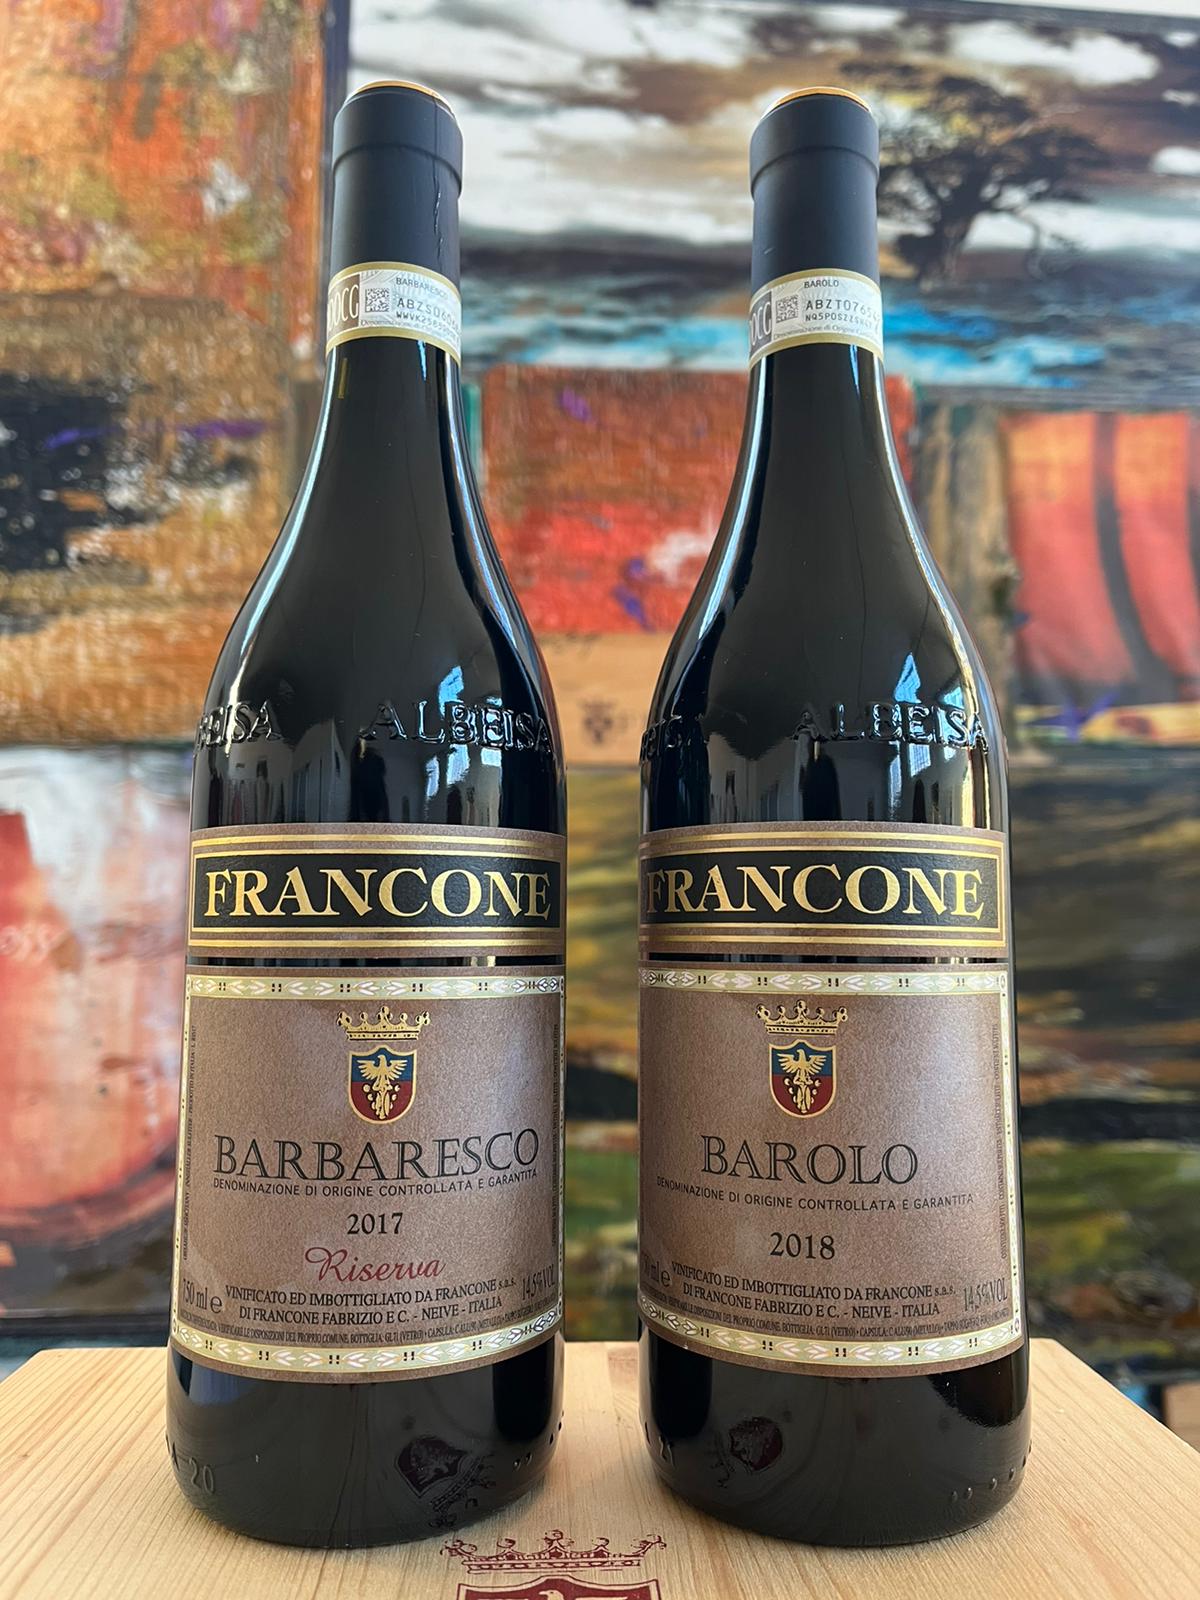 New released vintages: Barolo 2018 and Barbaresco Riserva 2017